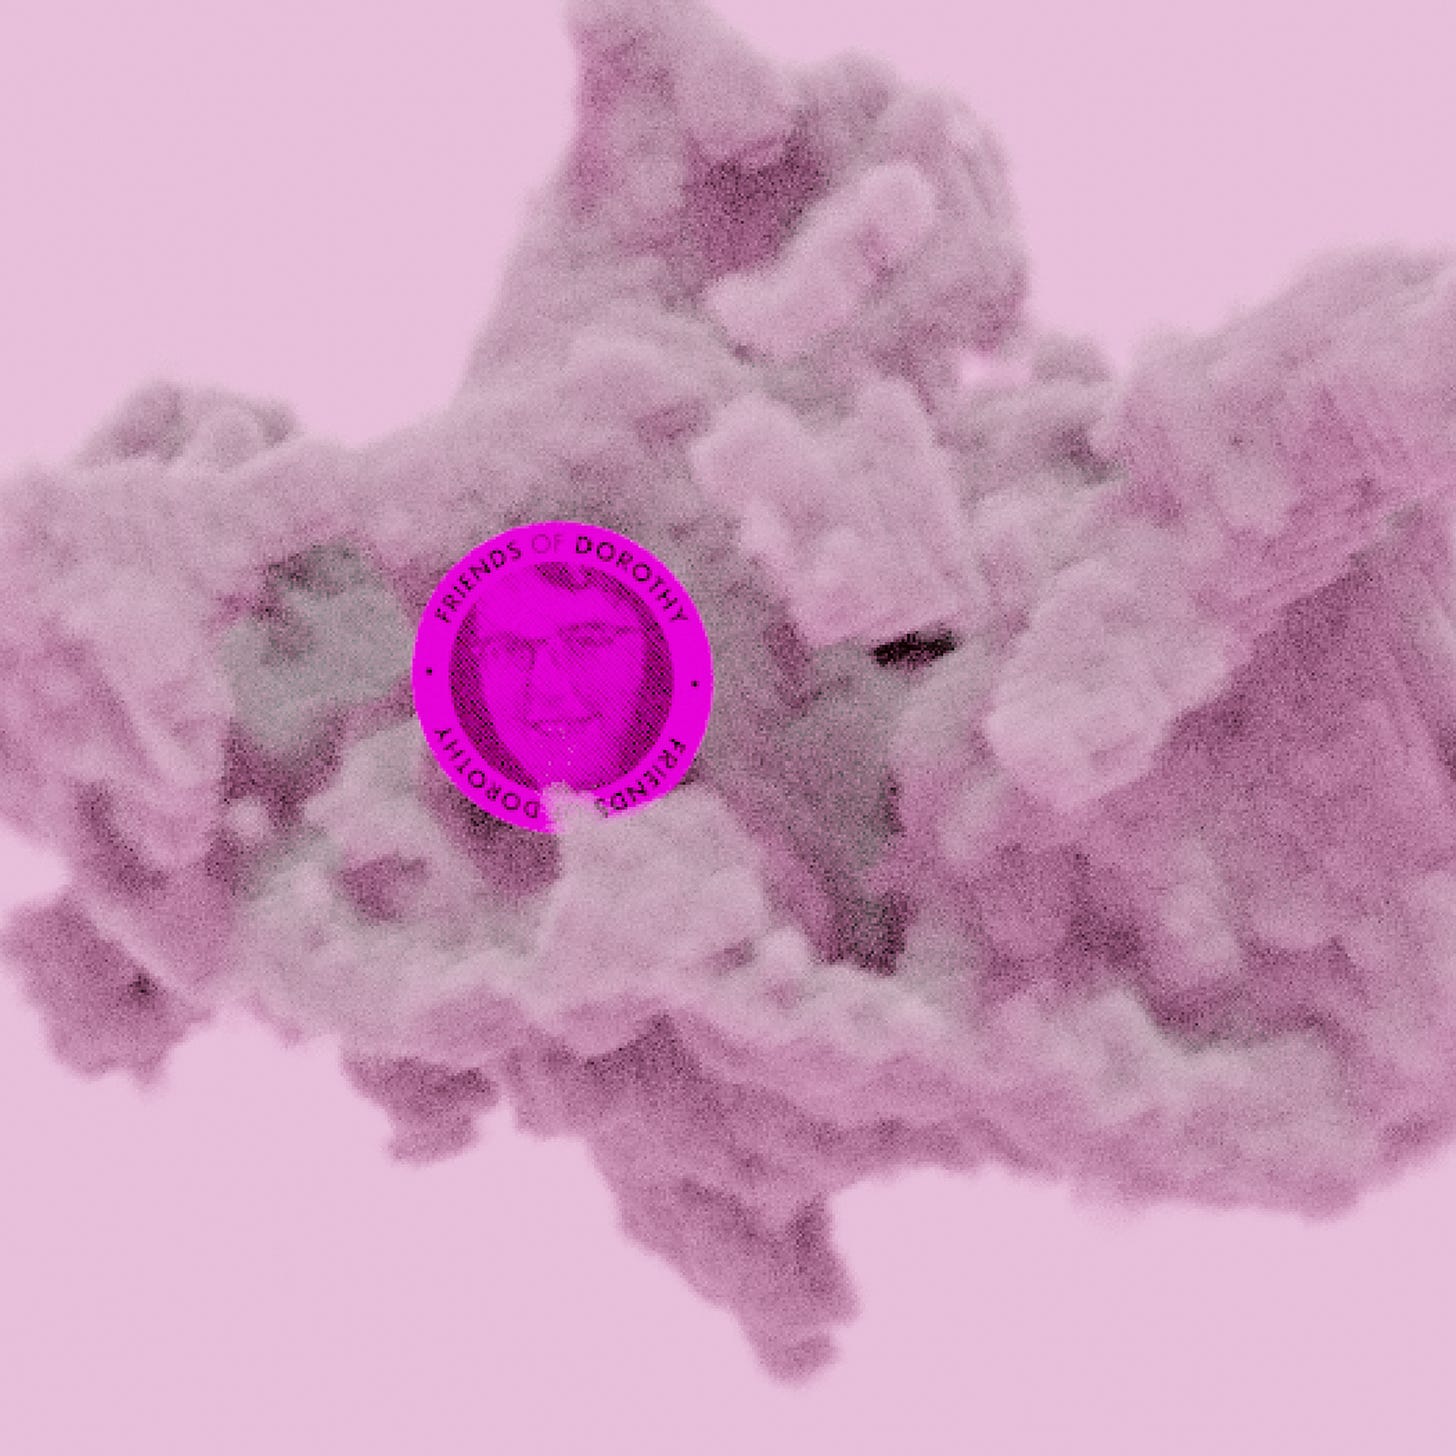 A hot pink circle logo reading 'Friends of Dorothy' is imbedded in a soft pink fluffy cloud, floating against a pink background.